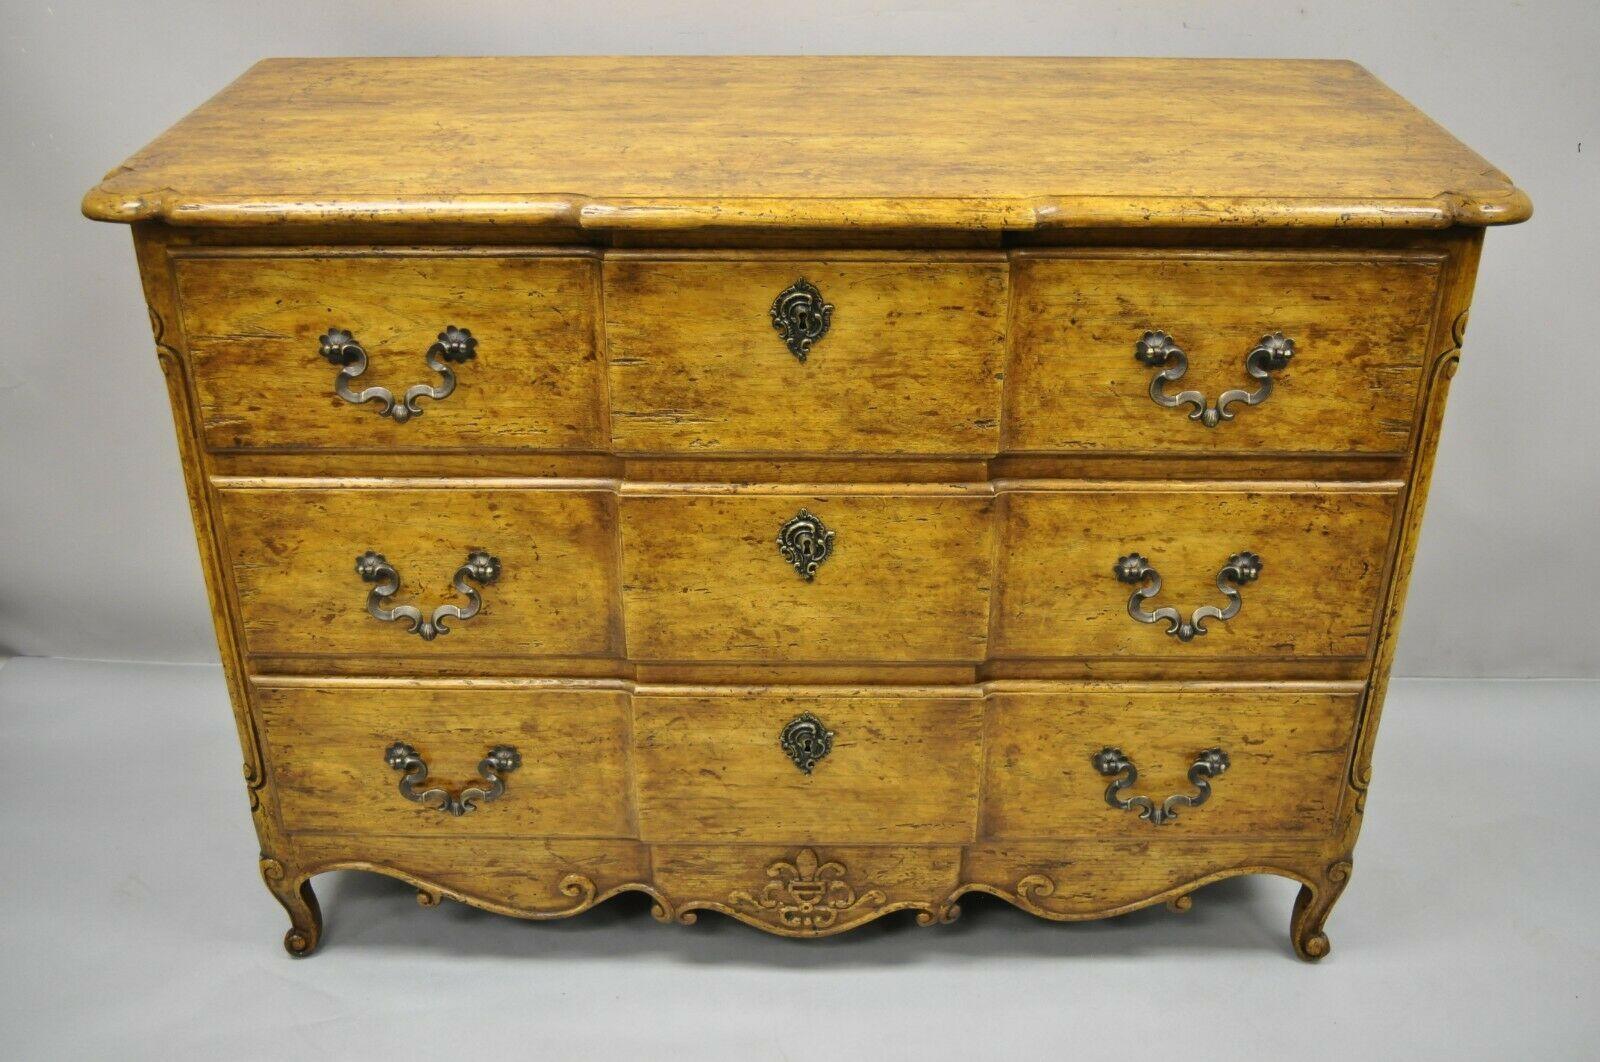 Minton Spidell 3 Drawer French Provincial Commode Bachelor Chest Dresser. Item features solid wood construction, beautiful wood grain, distressed finish, nicely carved details, original label, 3 drawers, cabriole legs, quality craftsmanship, great